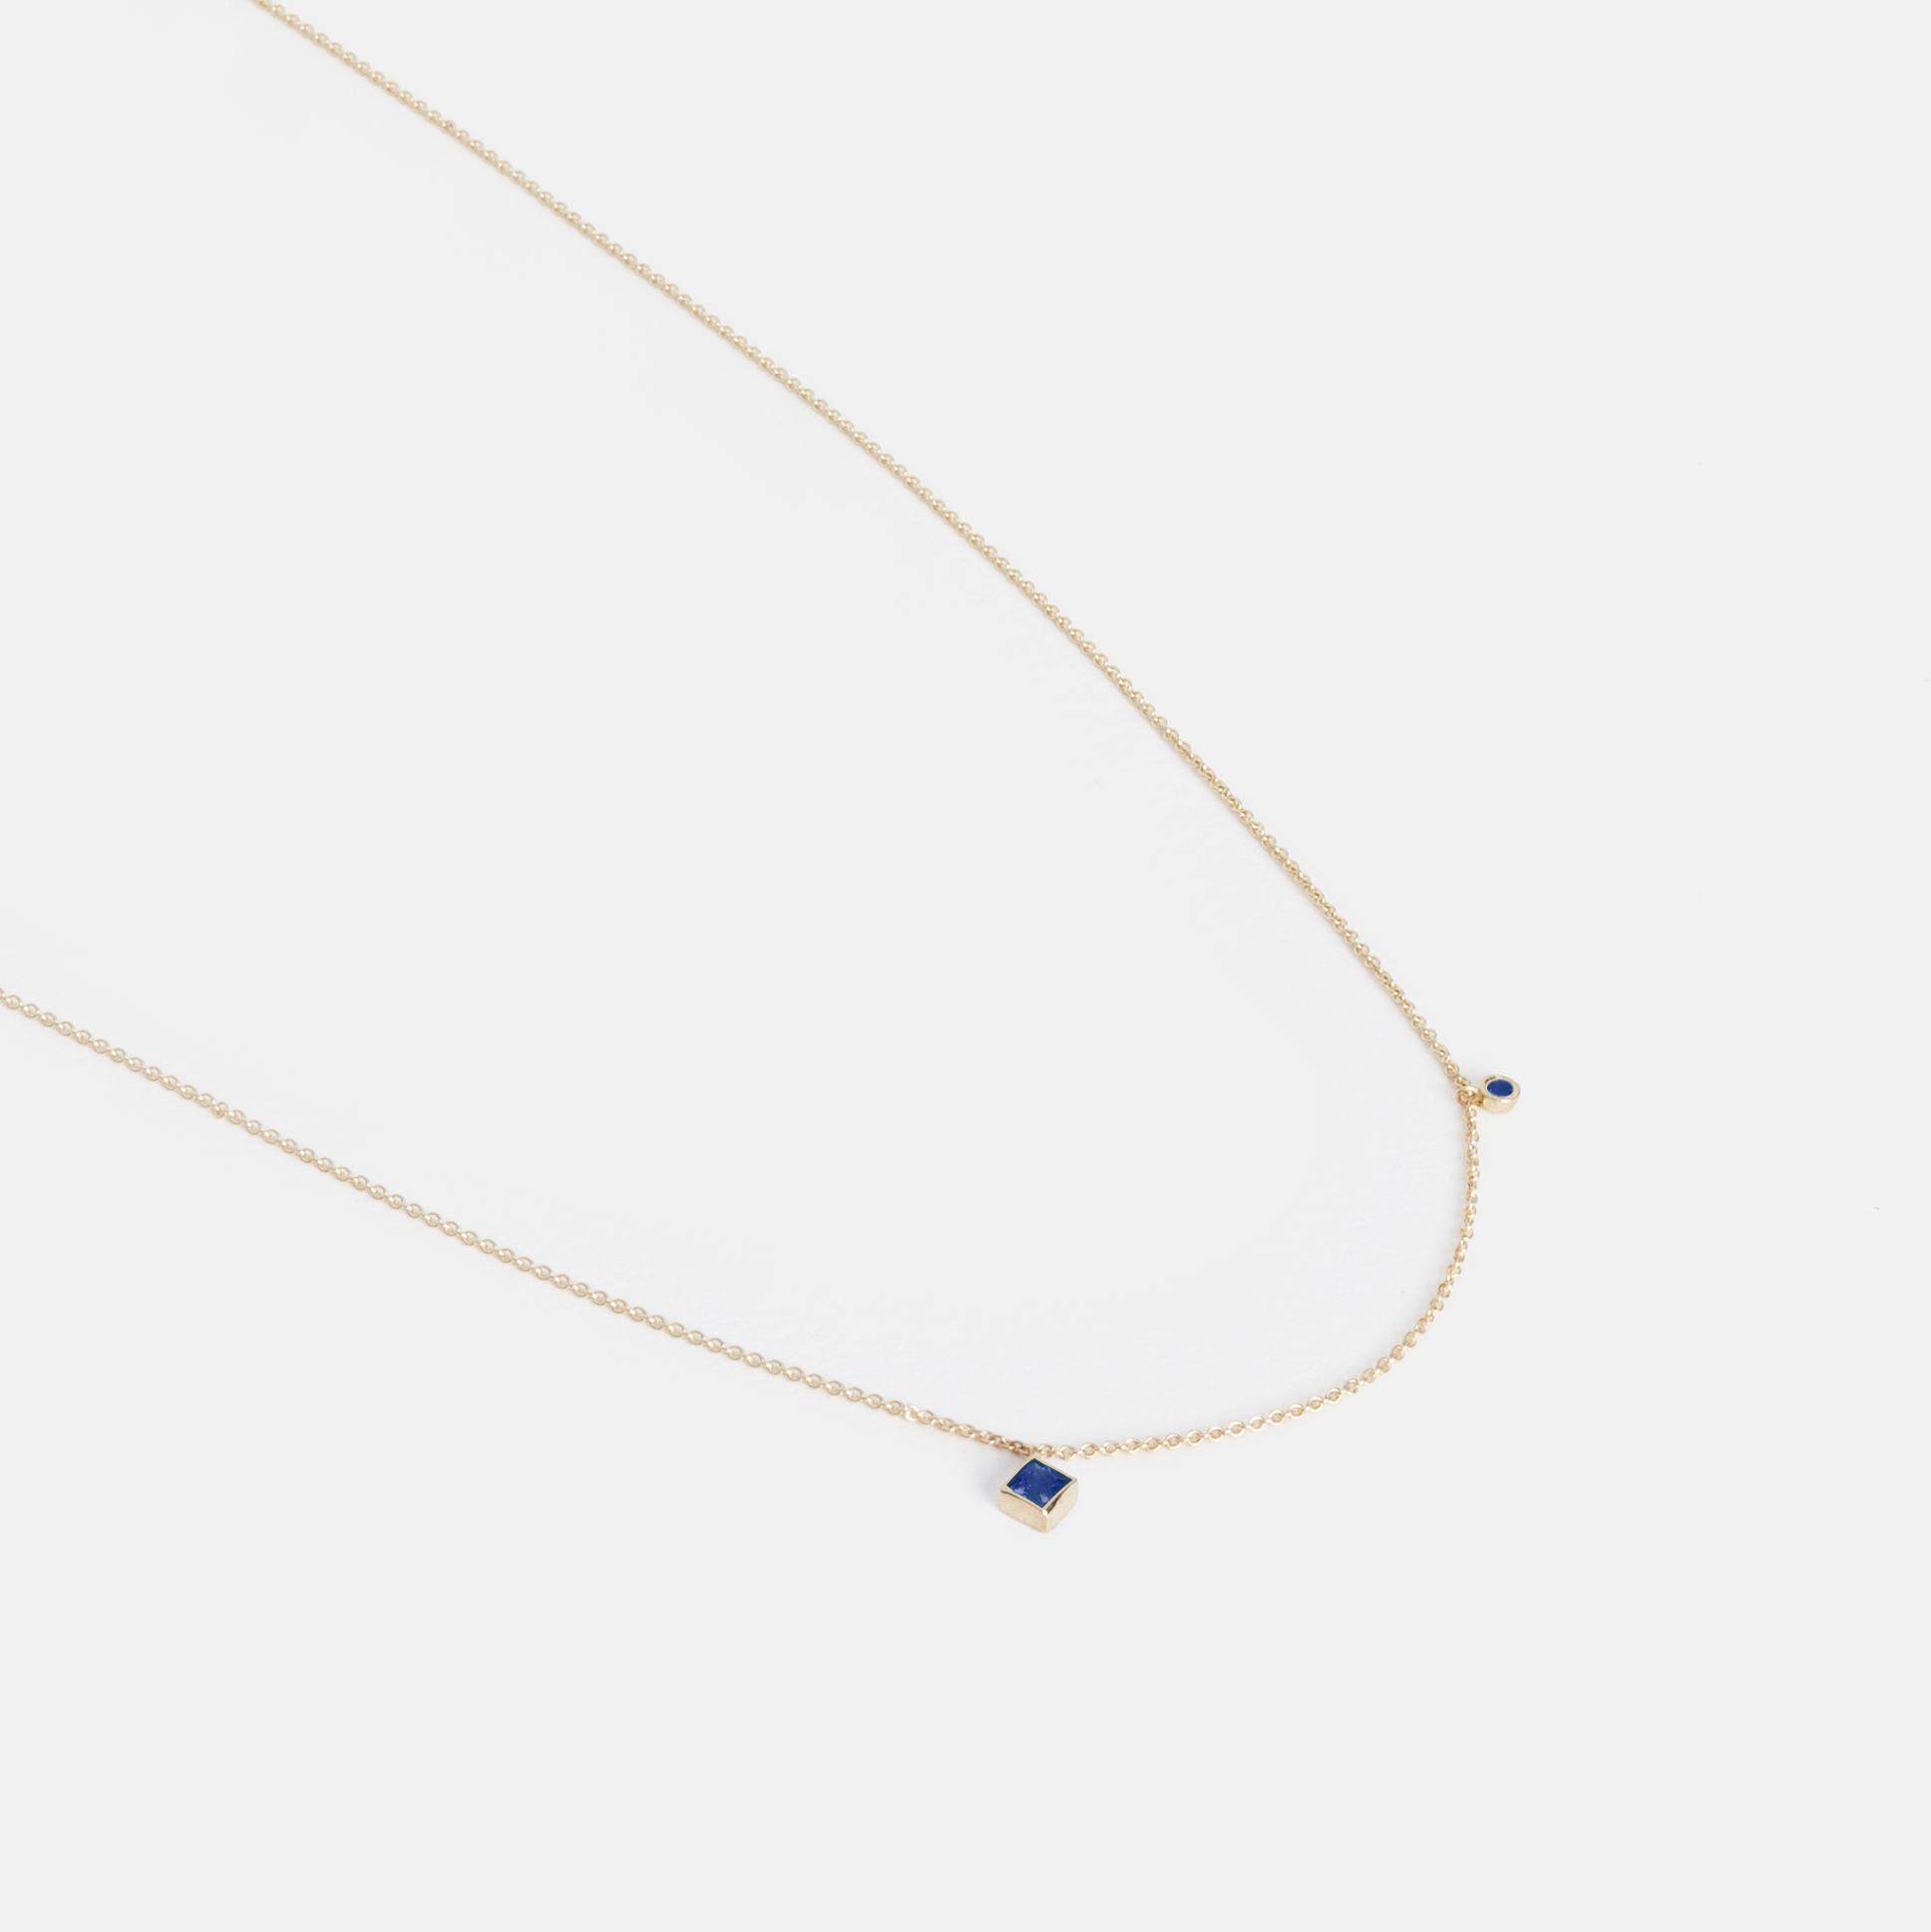 Ibi Delicate Necklace in 14k Gold set with Sapphires By SHW Fine Jewelry NYC